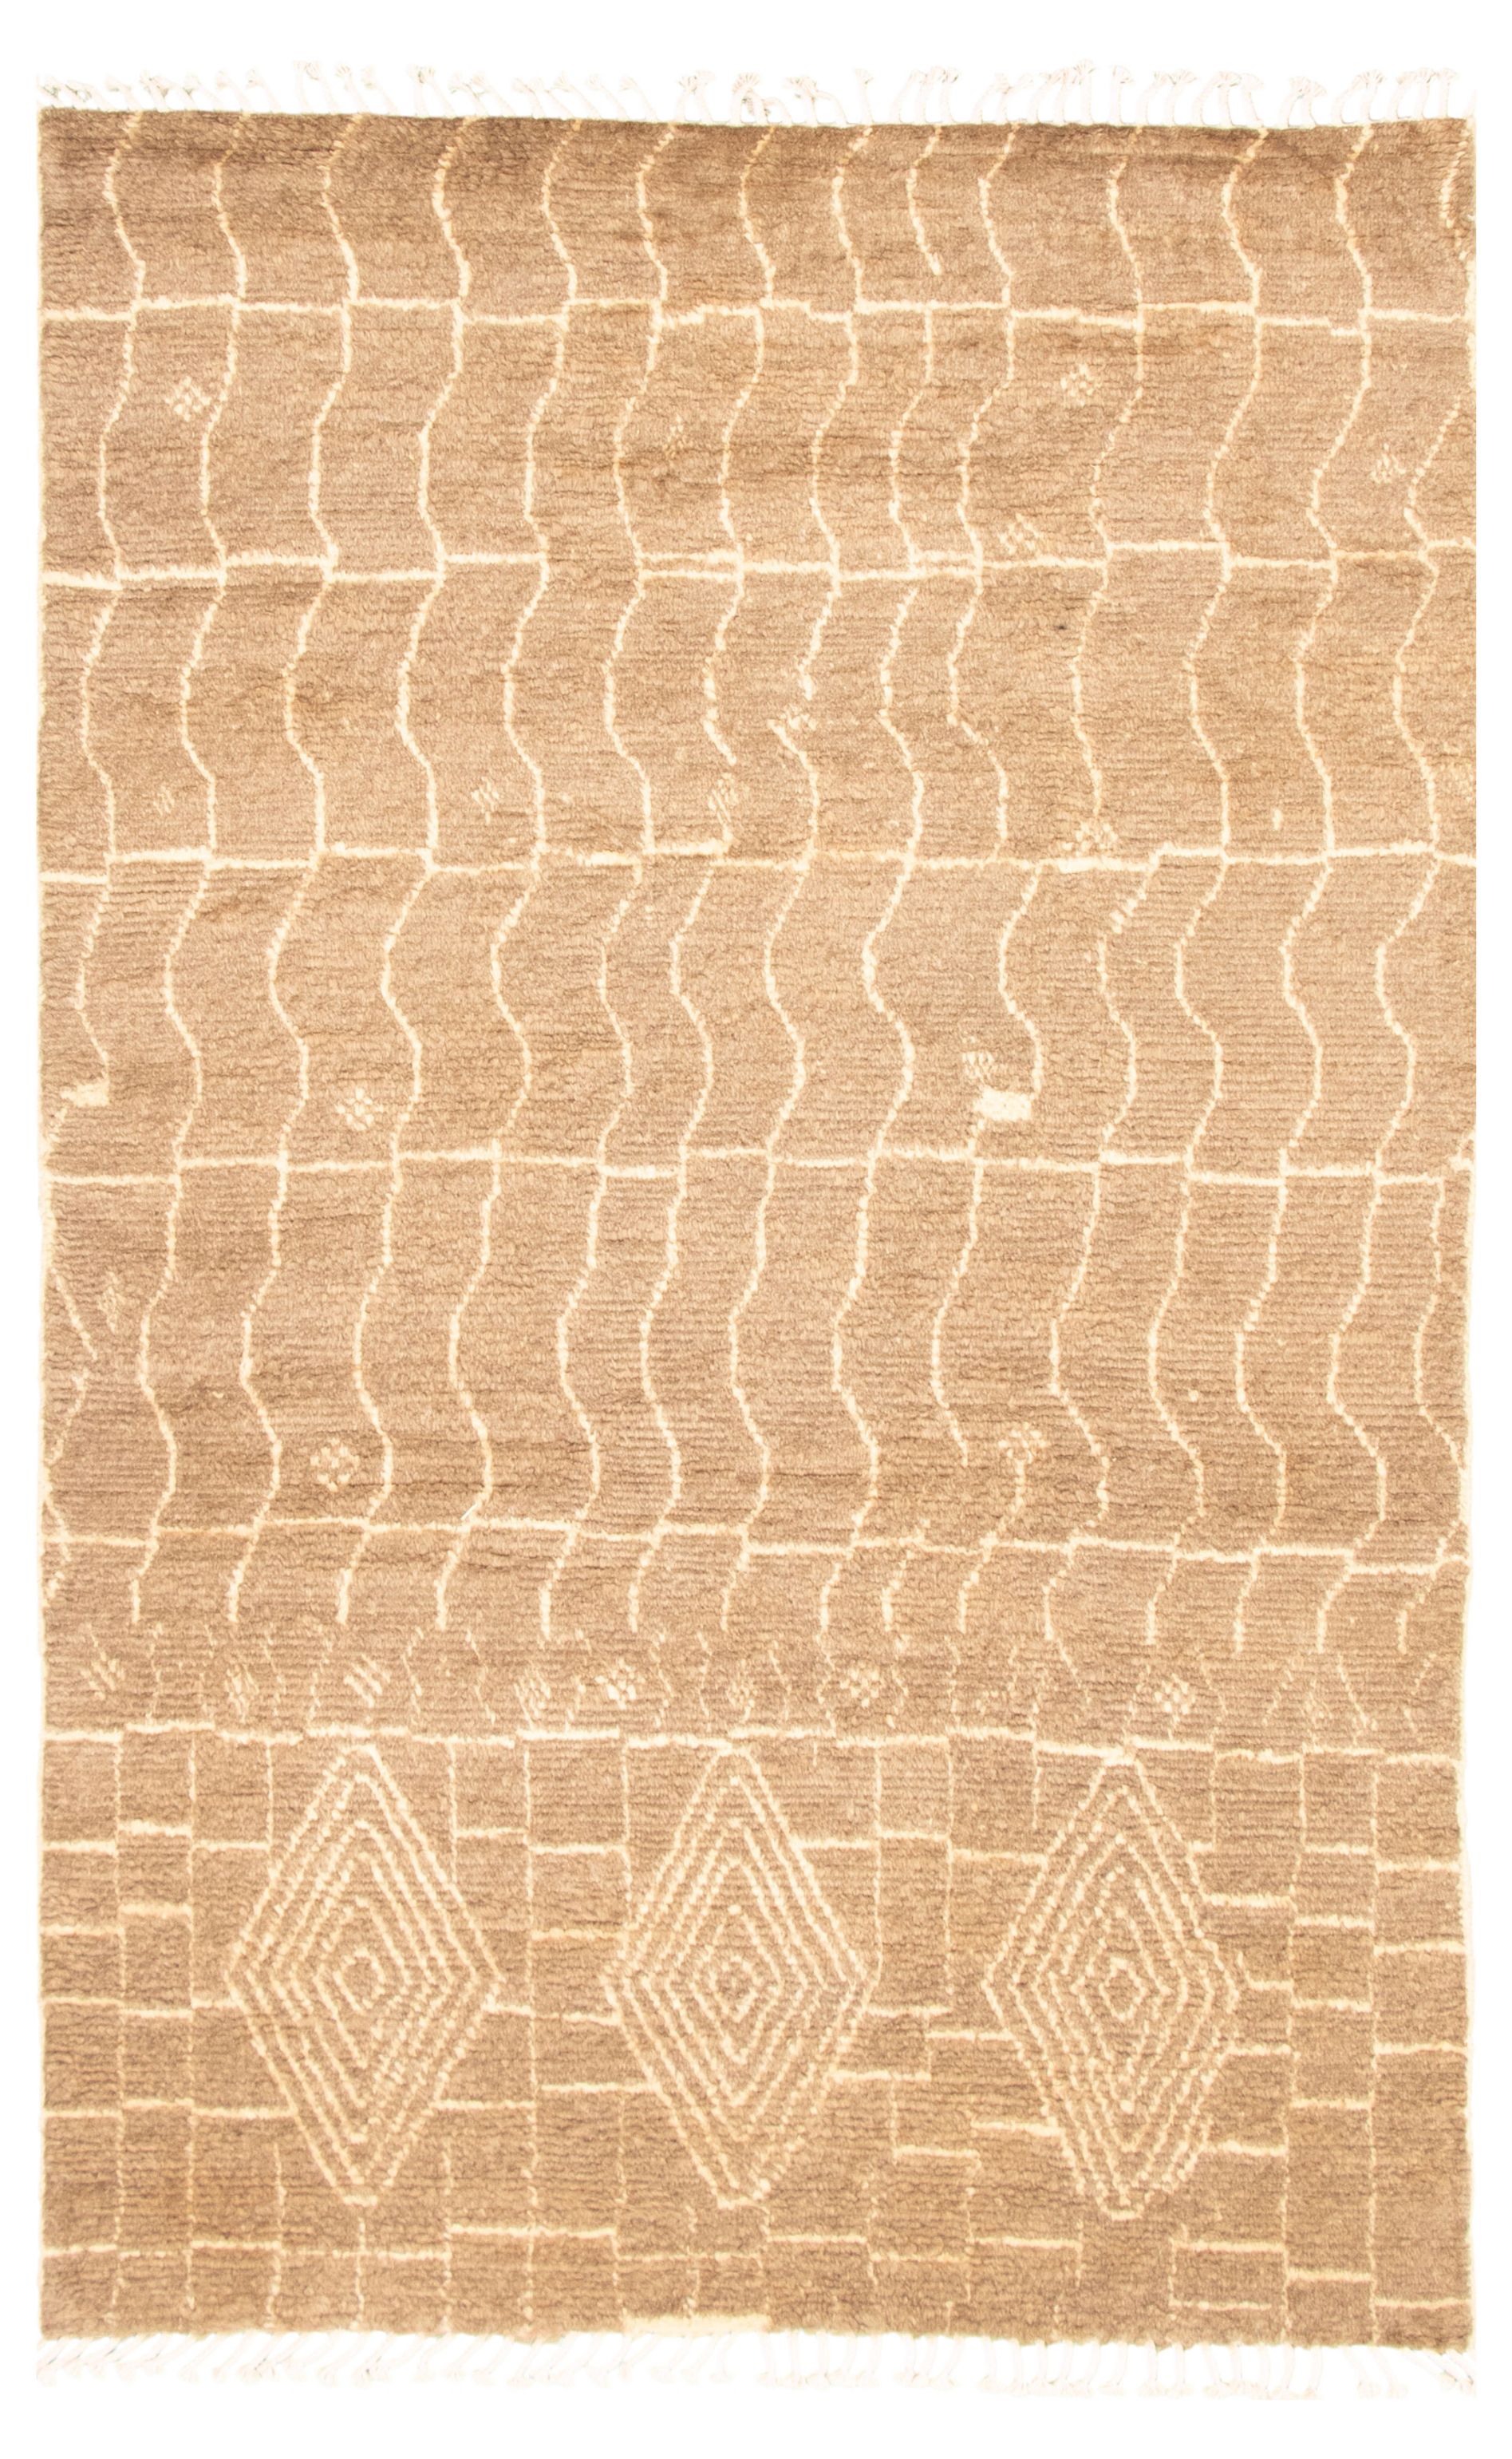 Hand-knotted Marrakech Brown Wool Rug 5'11" x 9'6" Size: 5'11" x 9'6"  